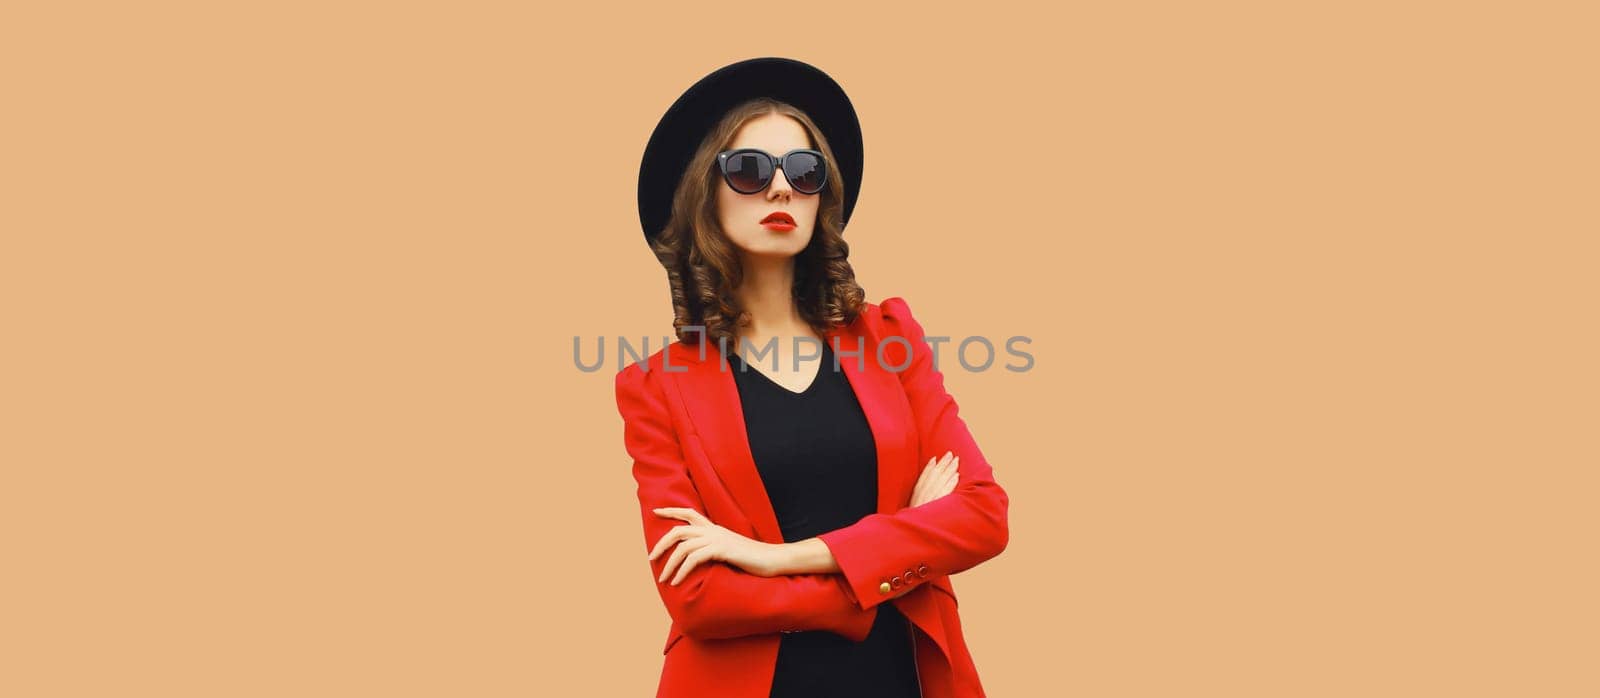 Stylish elegant woman posing in business suit, red blazer jacket and black round hat on brown studio background